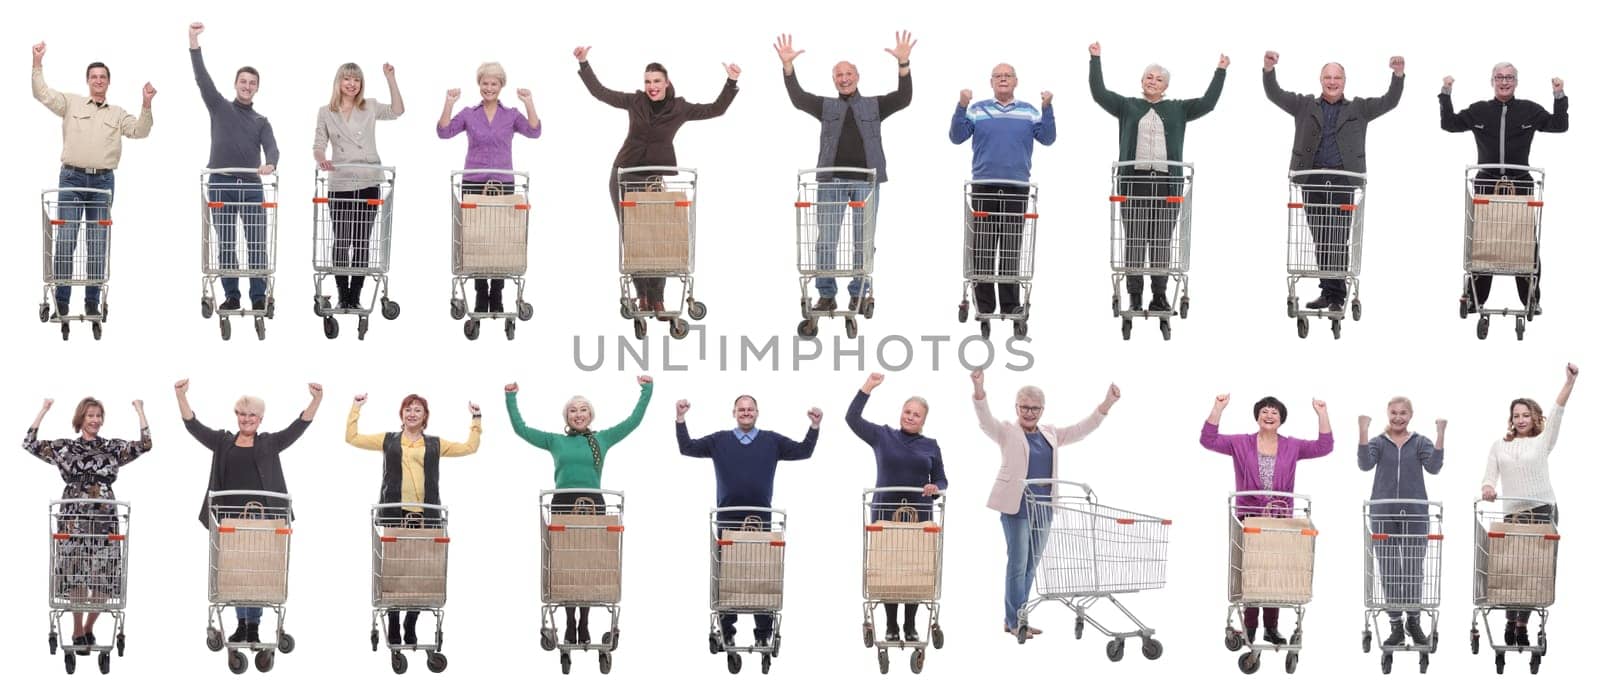 group of people with cart raised their hands up by asdf